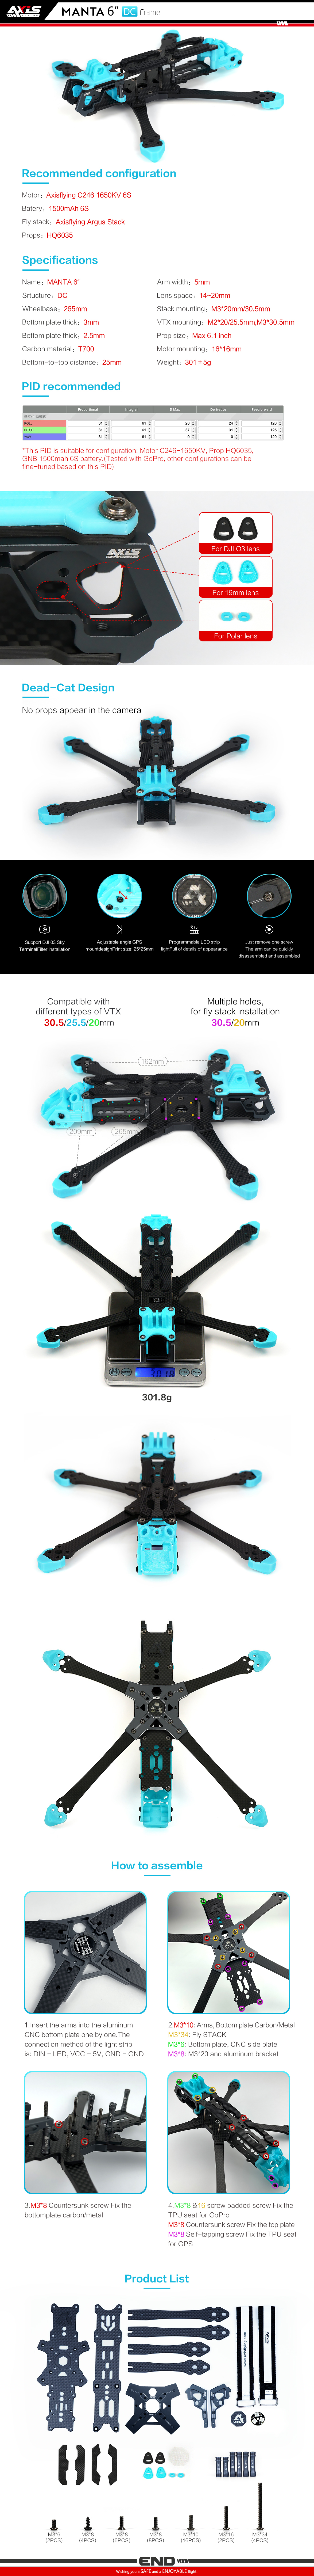 Axisflying MANTA6" / 6inch fpv freestyle DeadCat-DC type frame kit  Axisflying MANTA 6" best 6inch fpv freestyle DeadCat-DC type frame kit  cinematic drone,cinewhoop drone,longrange drone,freestyle drone,fpv drone,fpv quads,5inch freestyle drone,6inch freestyle drone,7inch longrange drone,5inch quads,6inch quads,7inch LR quads,7" fpv drone,7" fpv quads,7" longrange quads,6" cinematic quads,6" freestyle quads,6" longrange quads,DJI O3,DC FRAME,what can drones do?,what is the best professional drone?